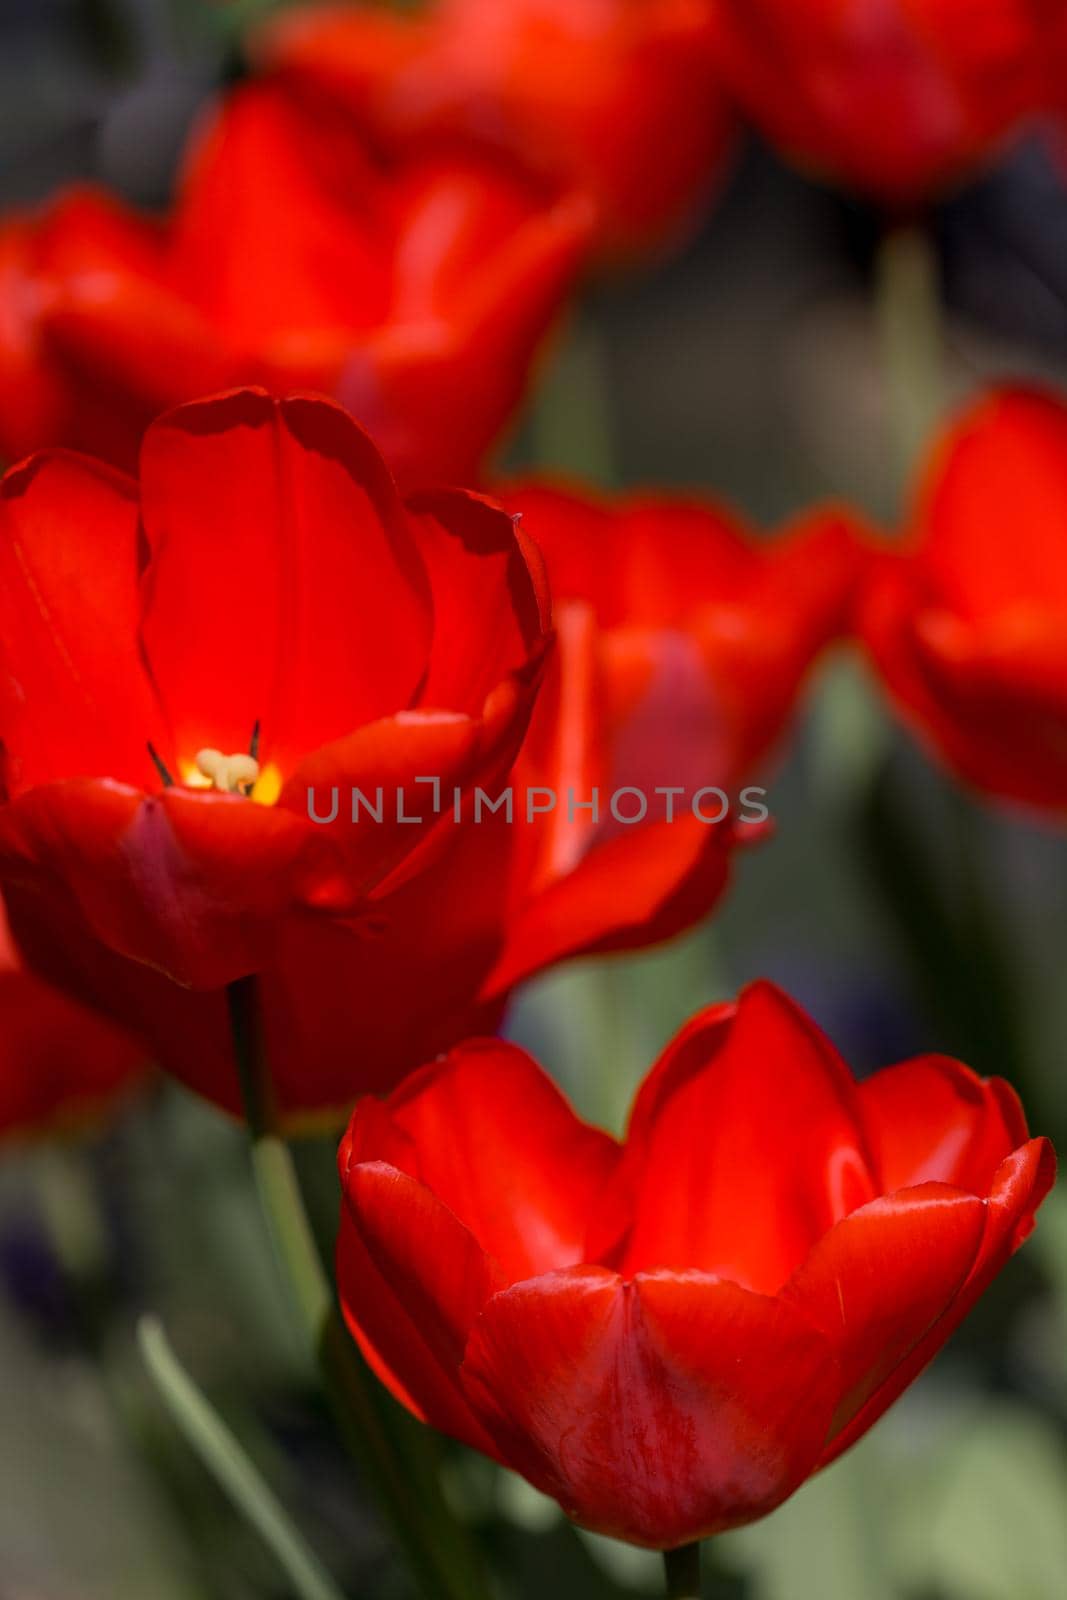 Vibrant red tulips in the spring sunshine by magicbones